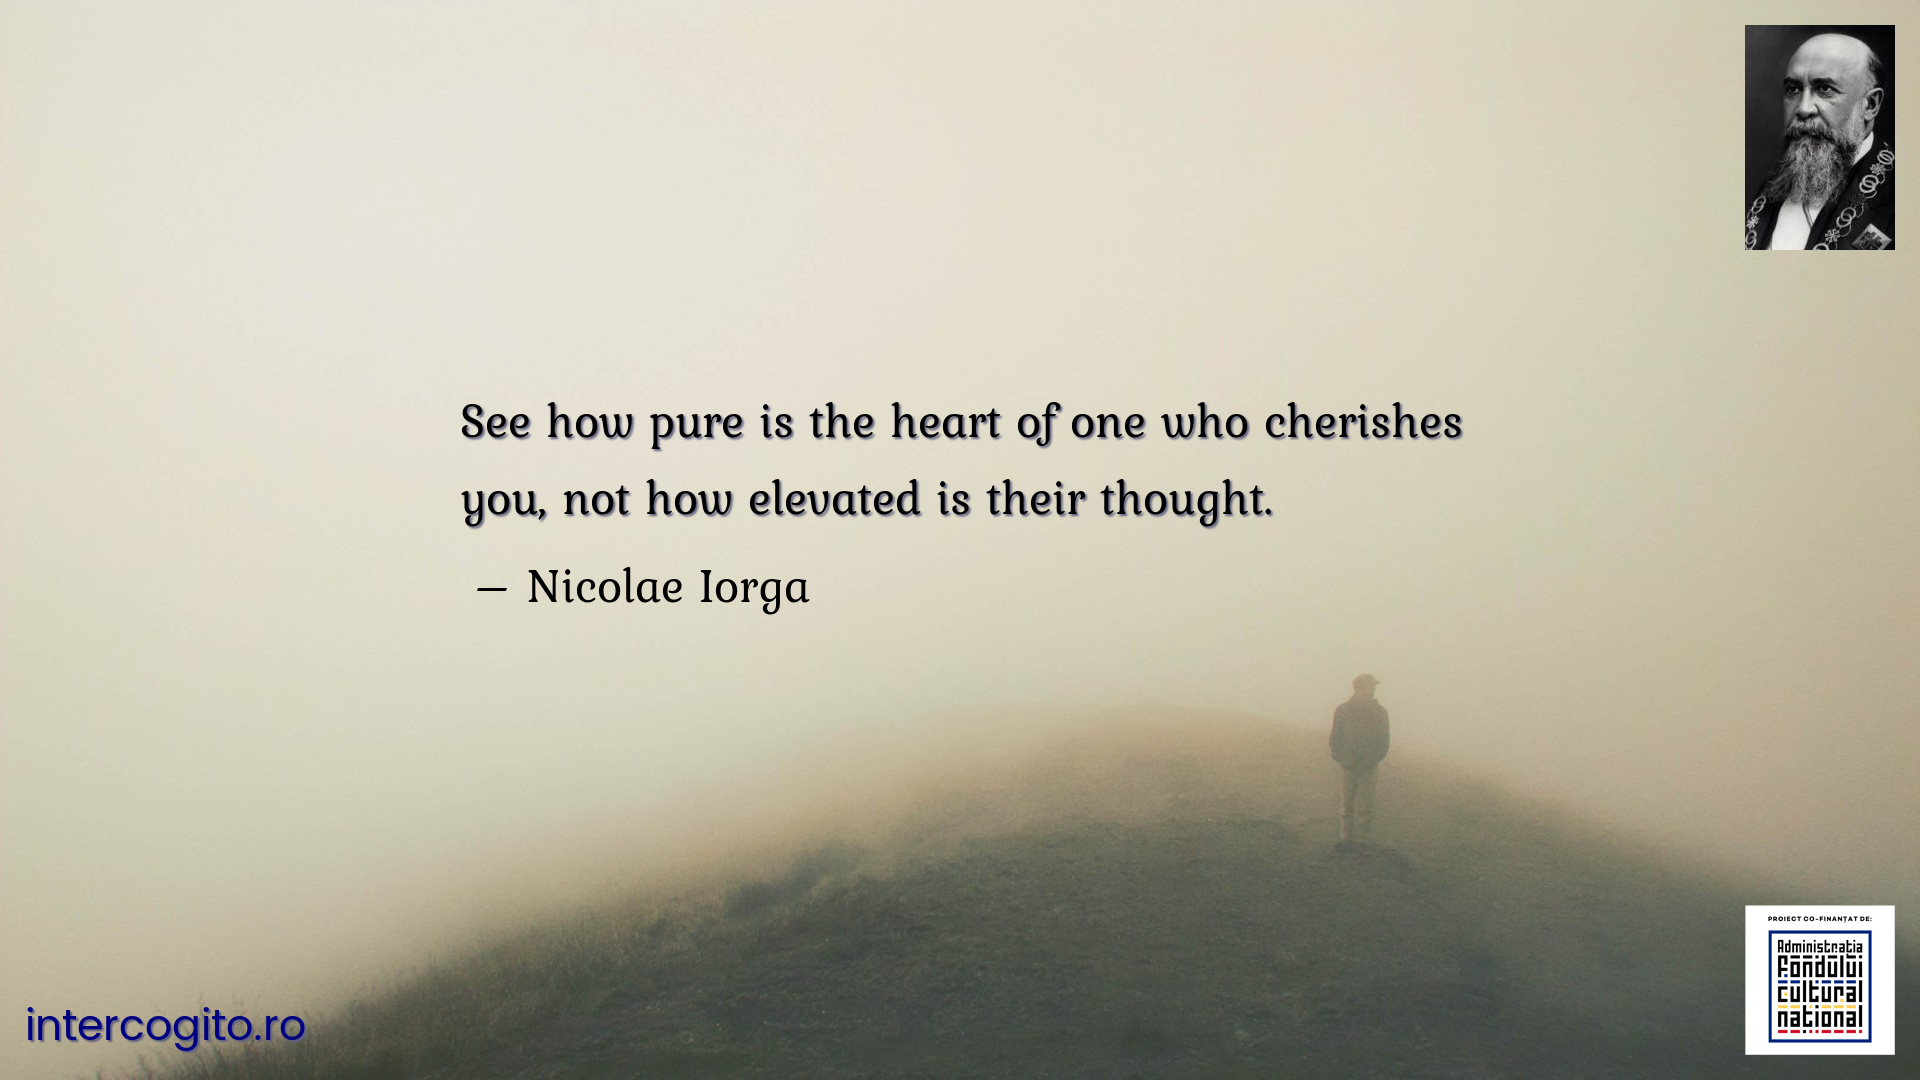 See how pure is the heart of one who cherishes you, not how elevated is their thought.